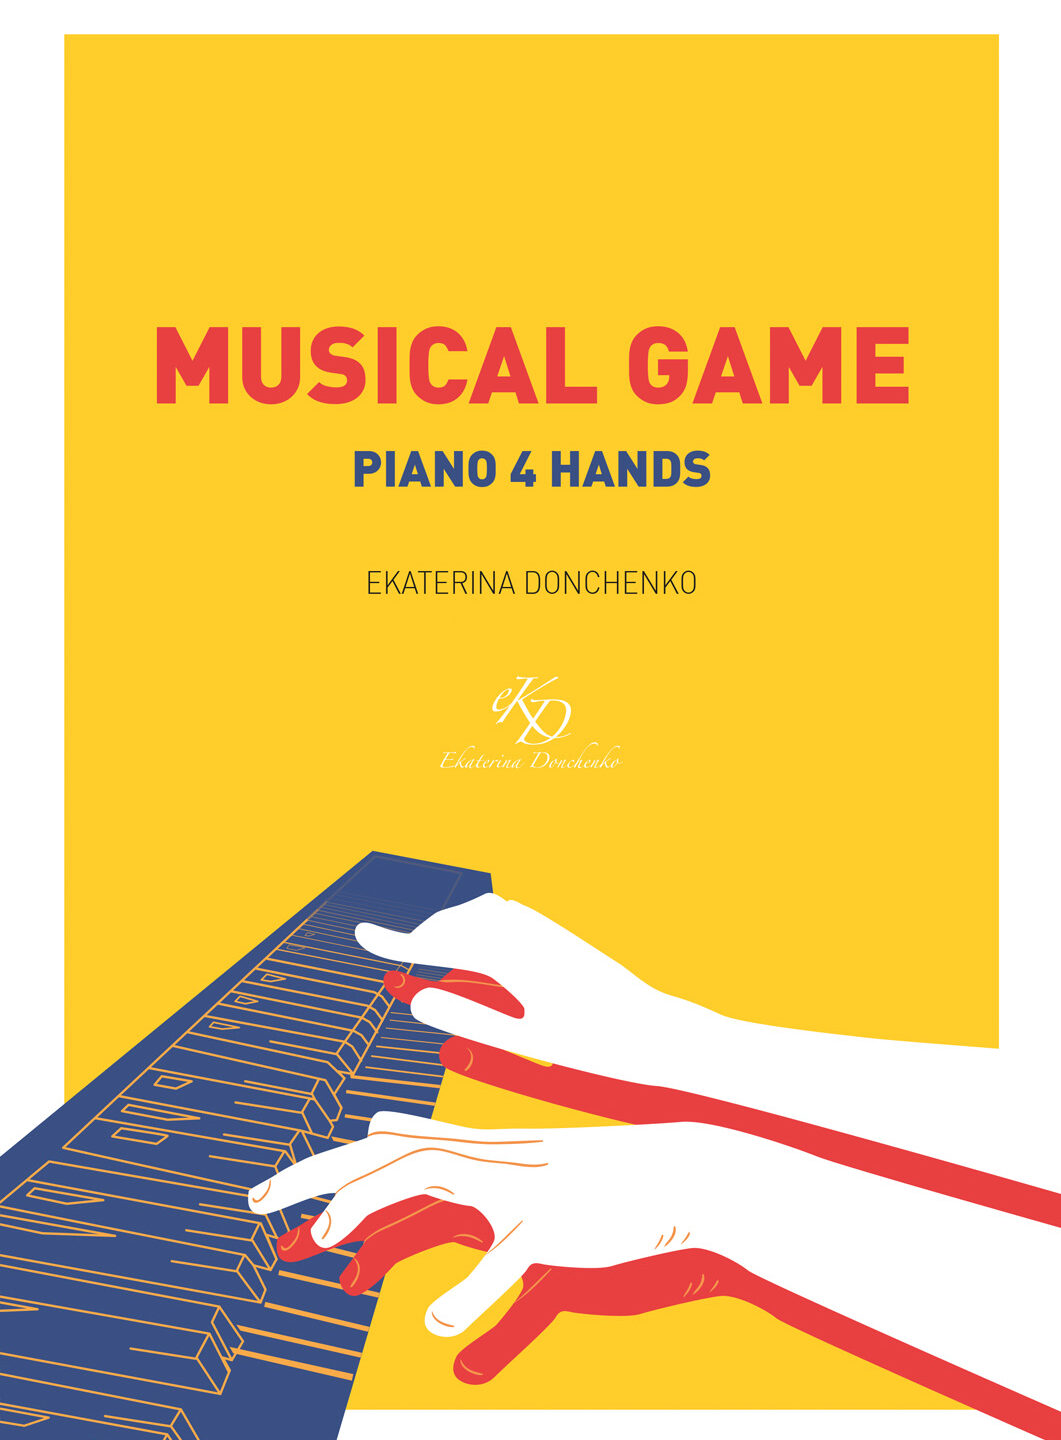 MUSICAL GAME – piano 4 hands